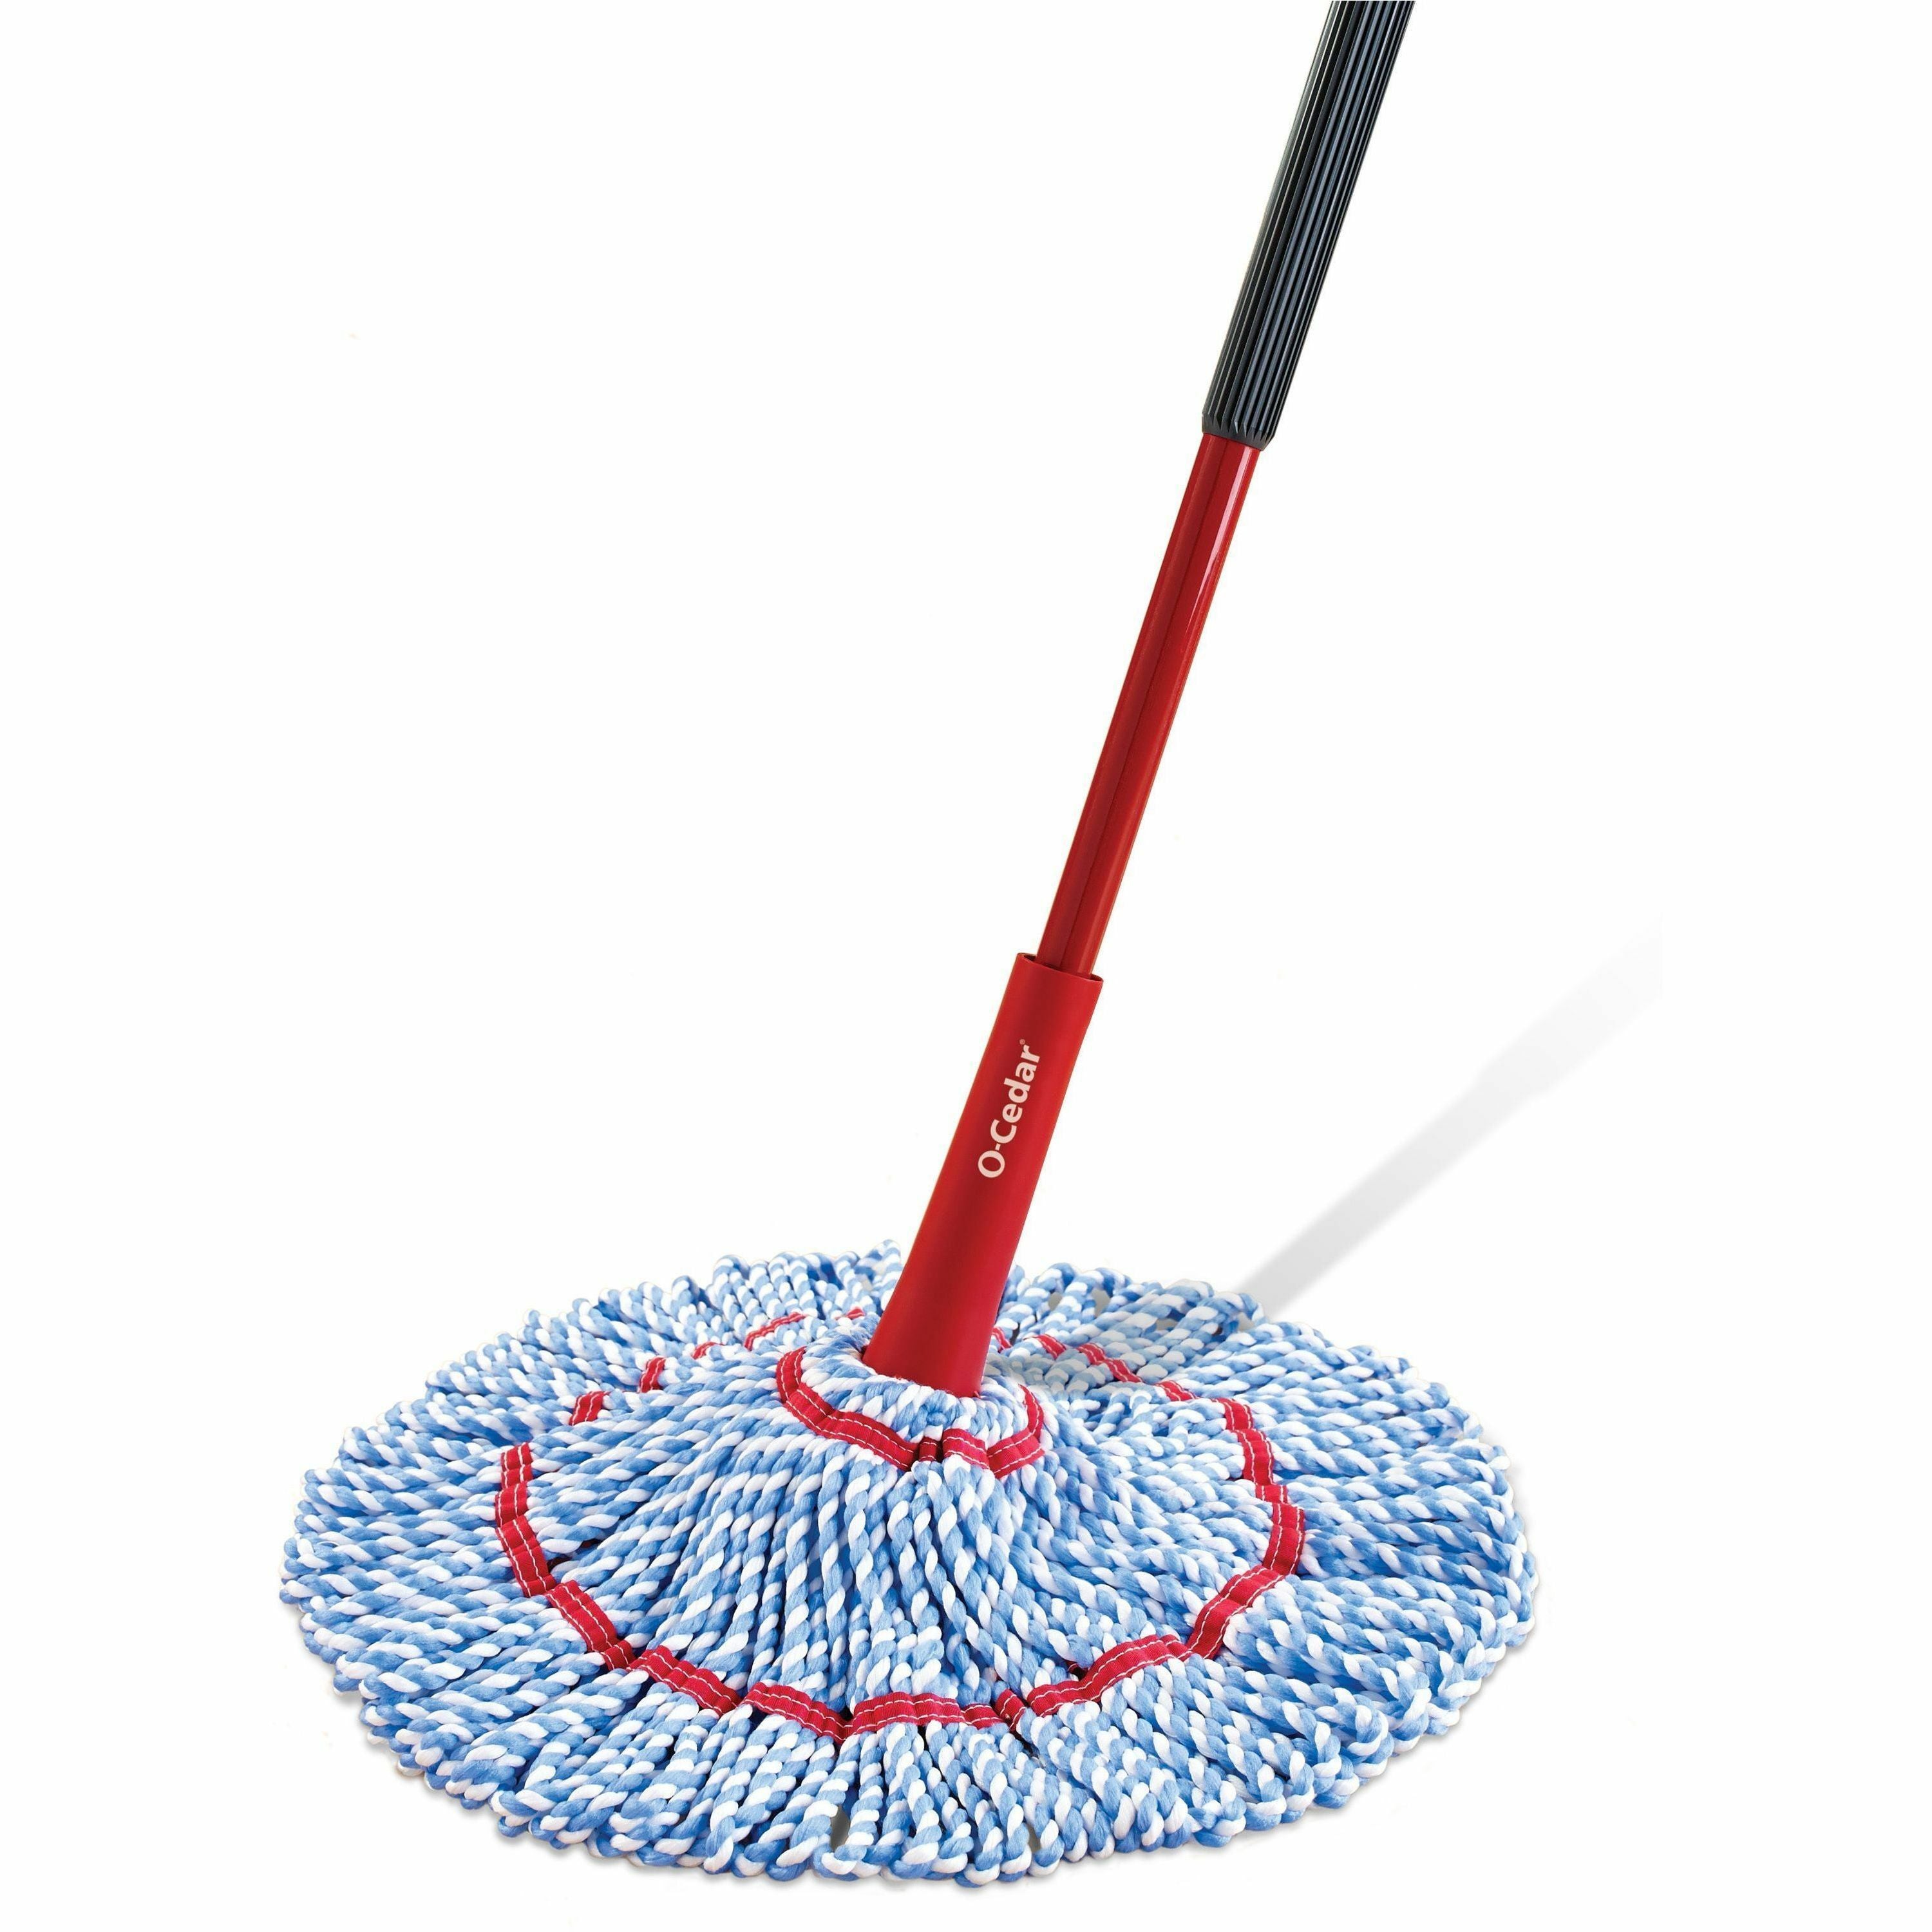 o-cedar-microtwist-max-microfiber-mop-microfiber-head-absorbent-reusable-machine-washable-easy-to-use-comfortable-grip-refillable-1-each-multi_fhp170630 - 1